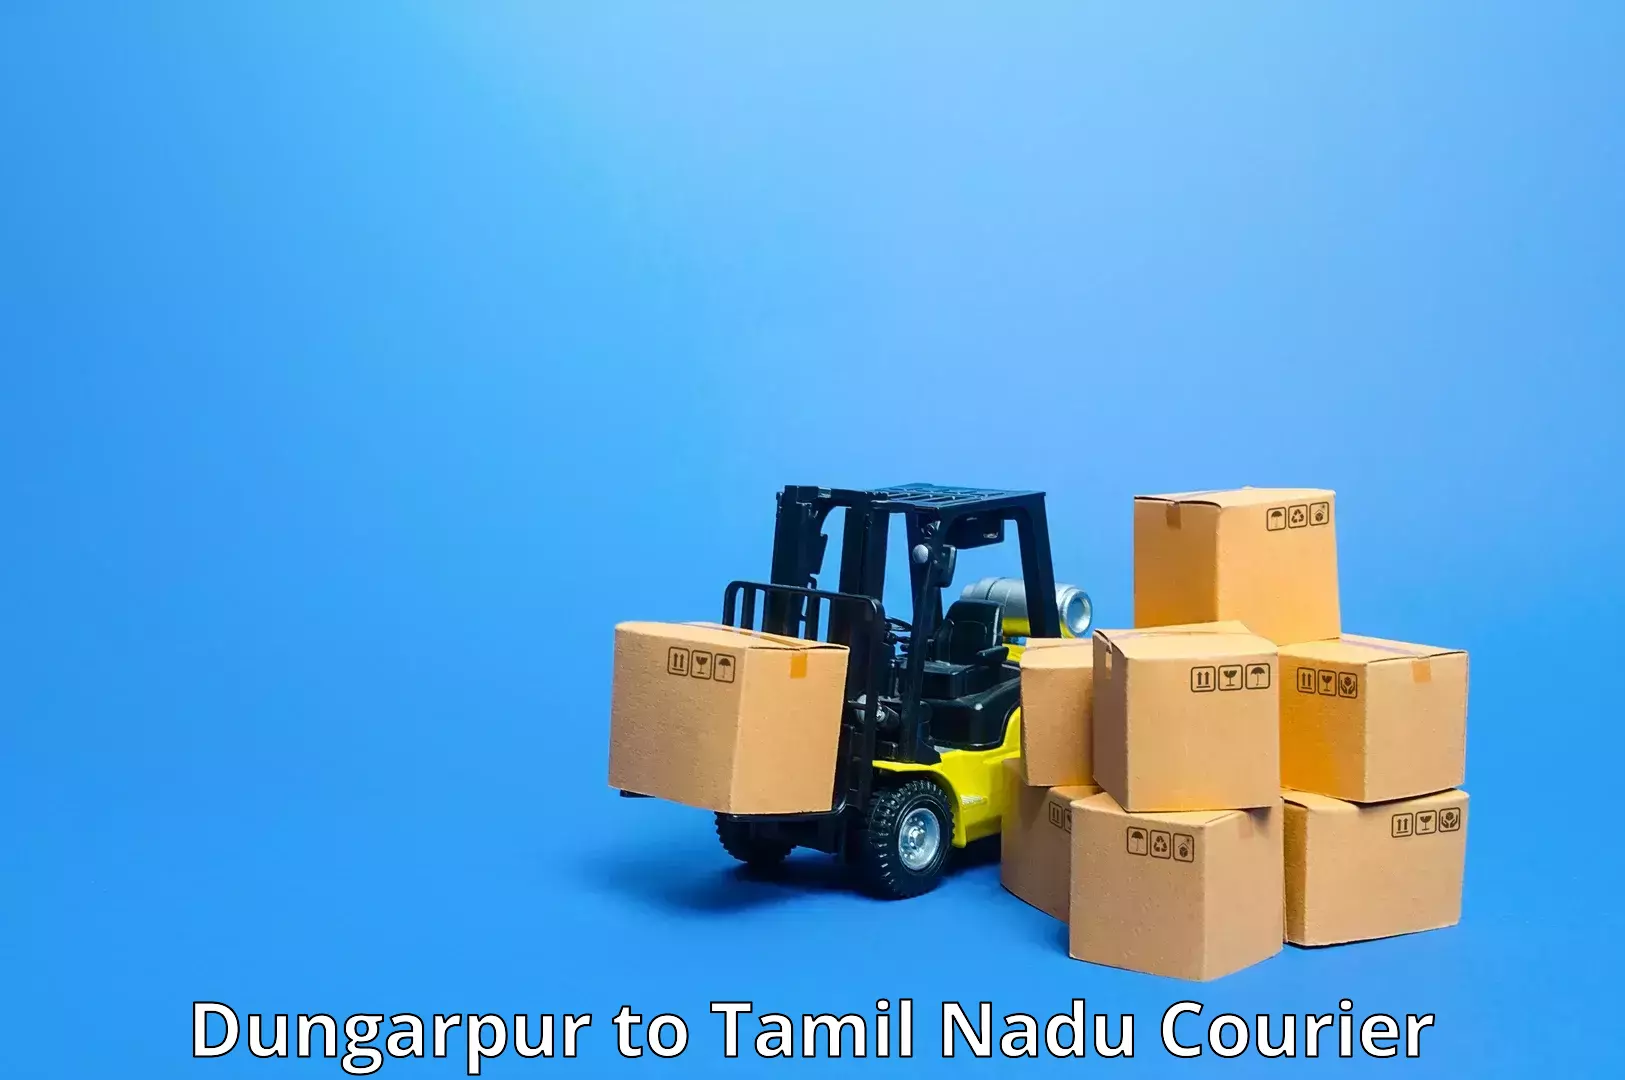 Nationwide shipping coverage Dungarpur to Kovilpatti